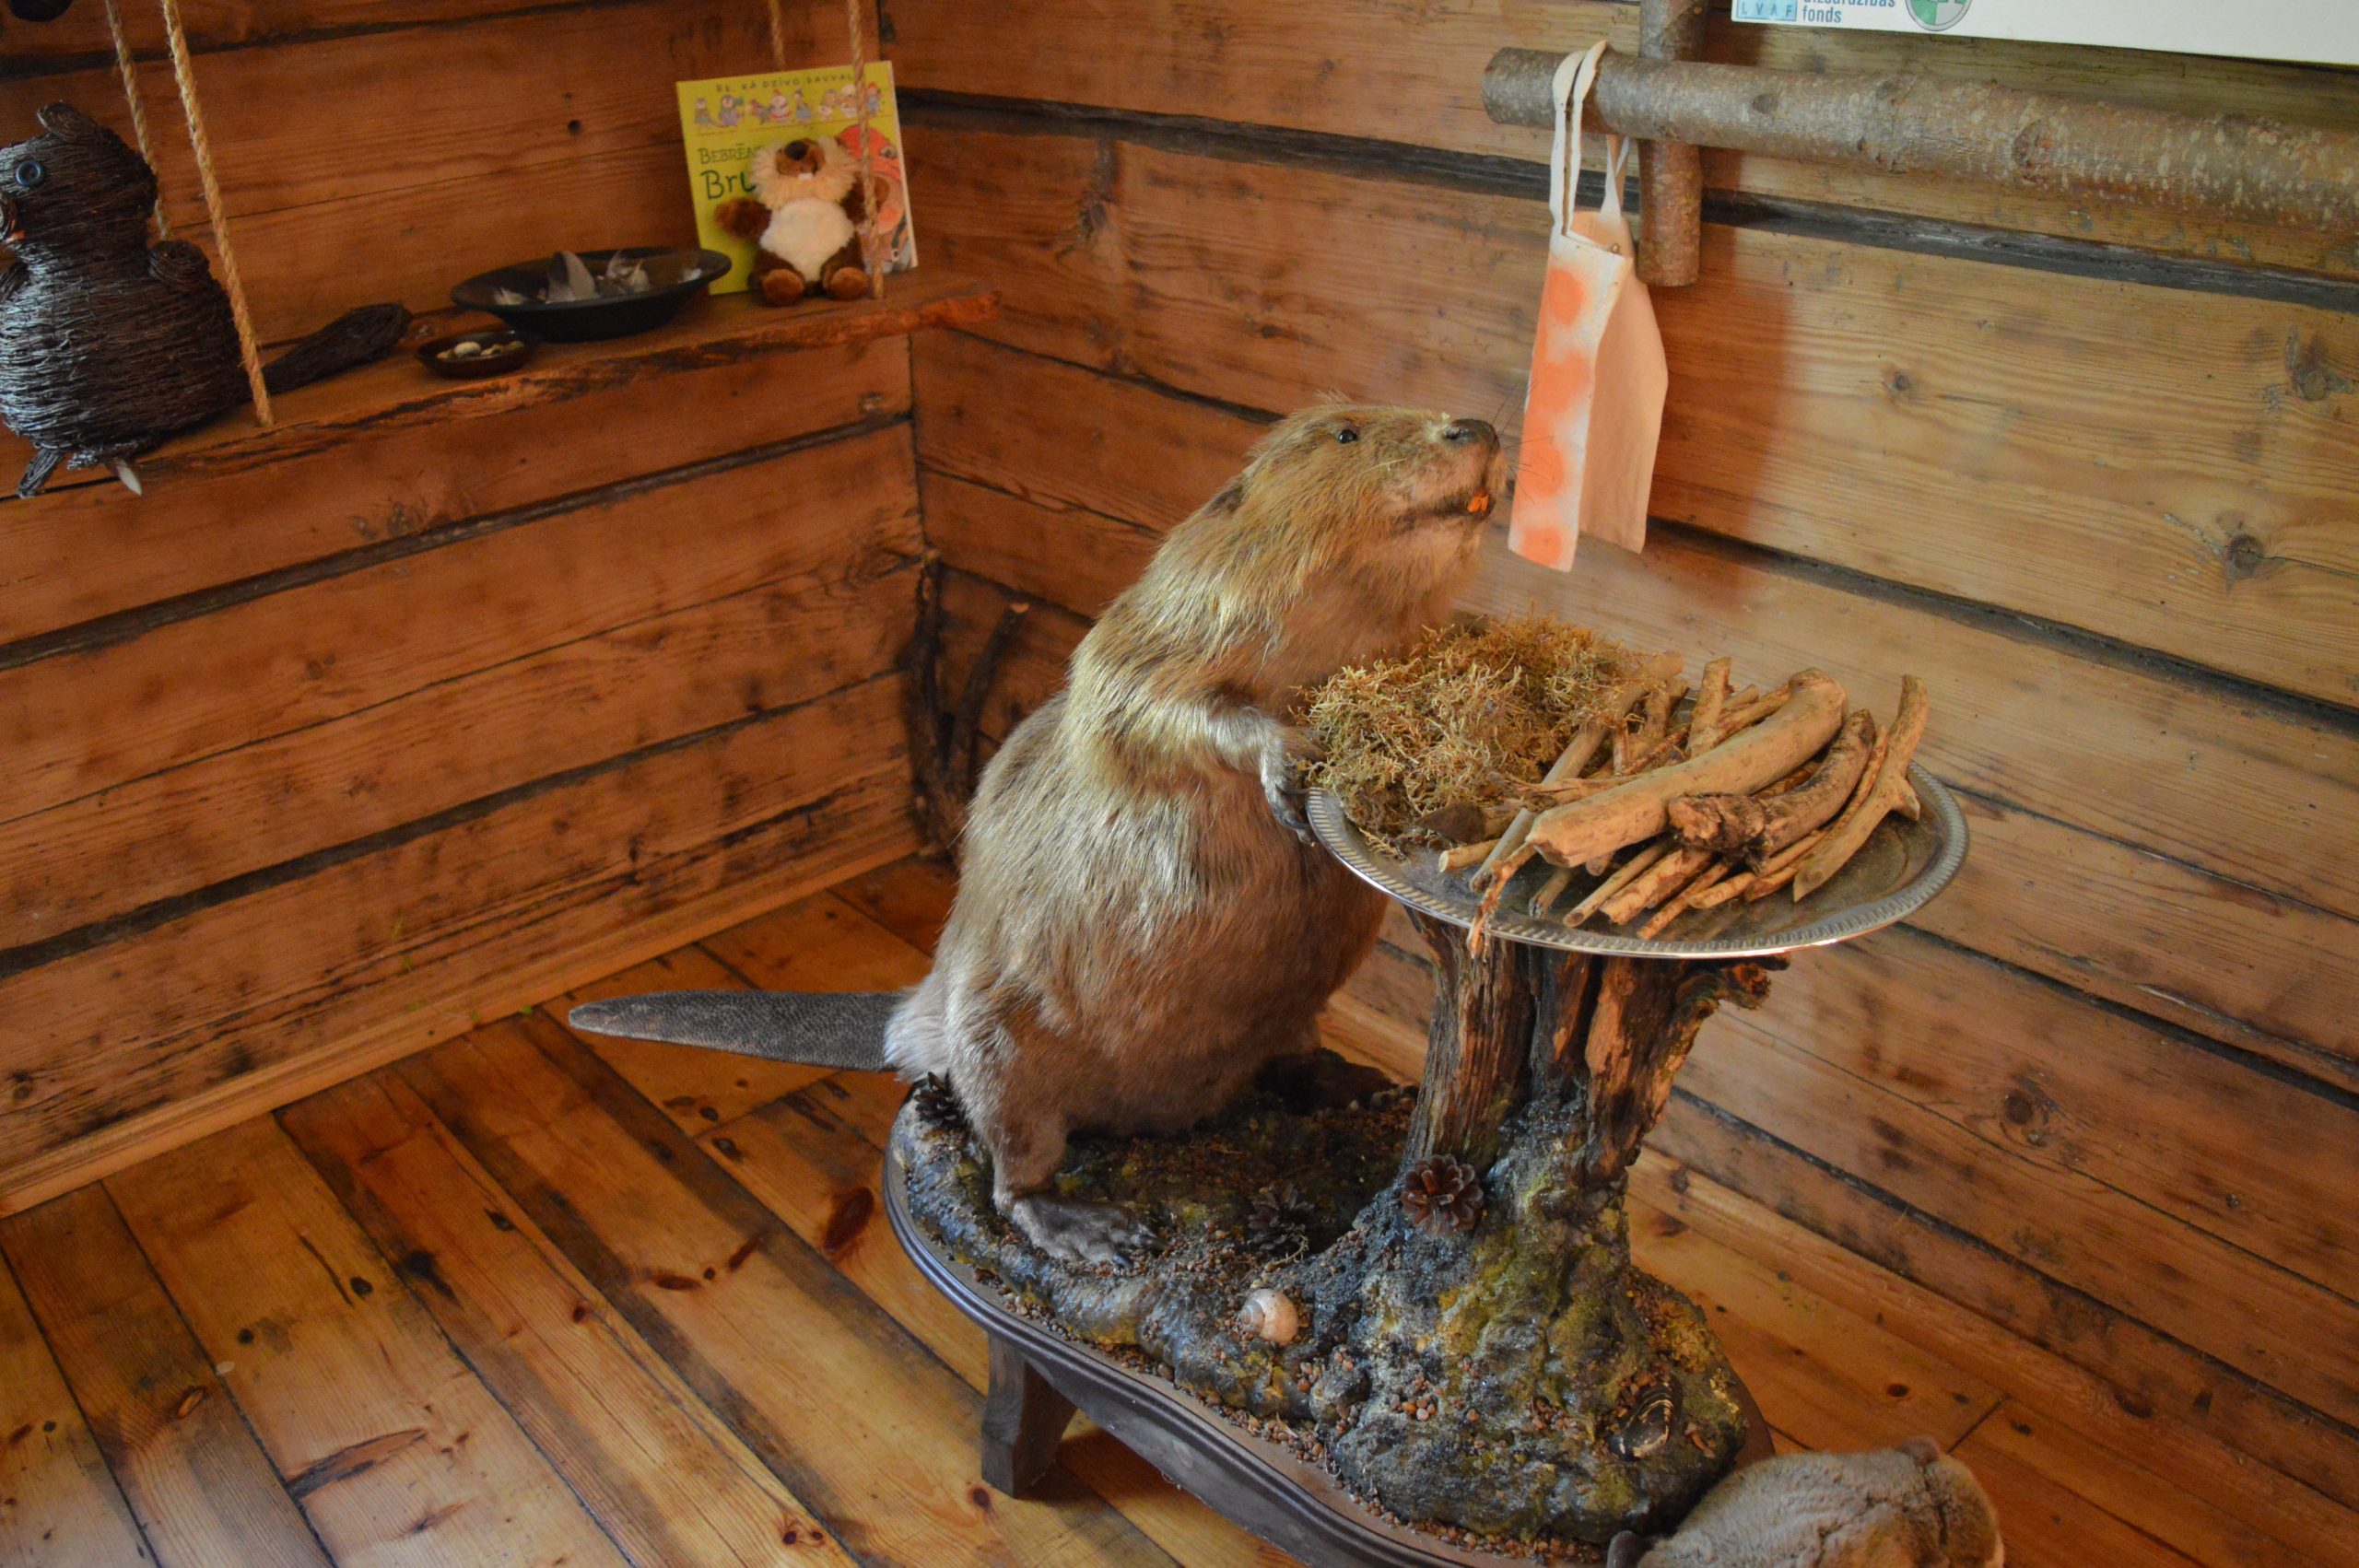 Exposition of a beaver